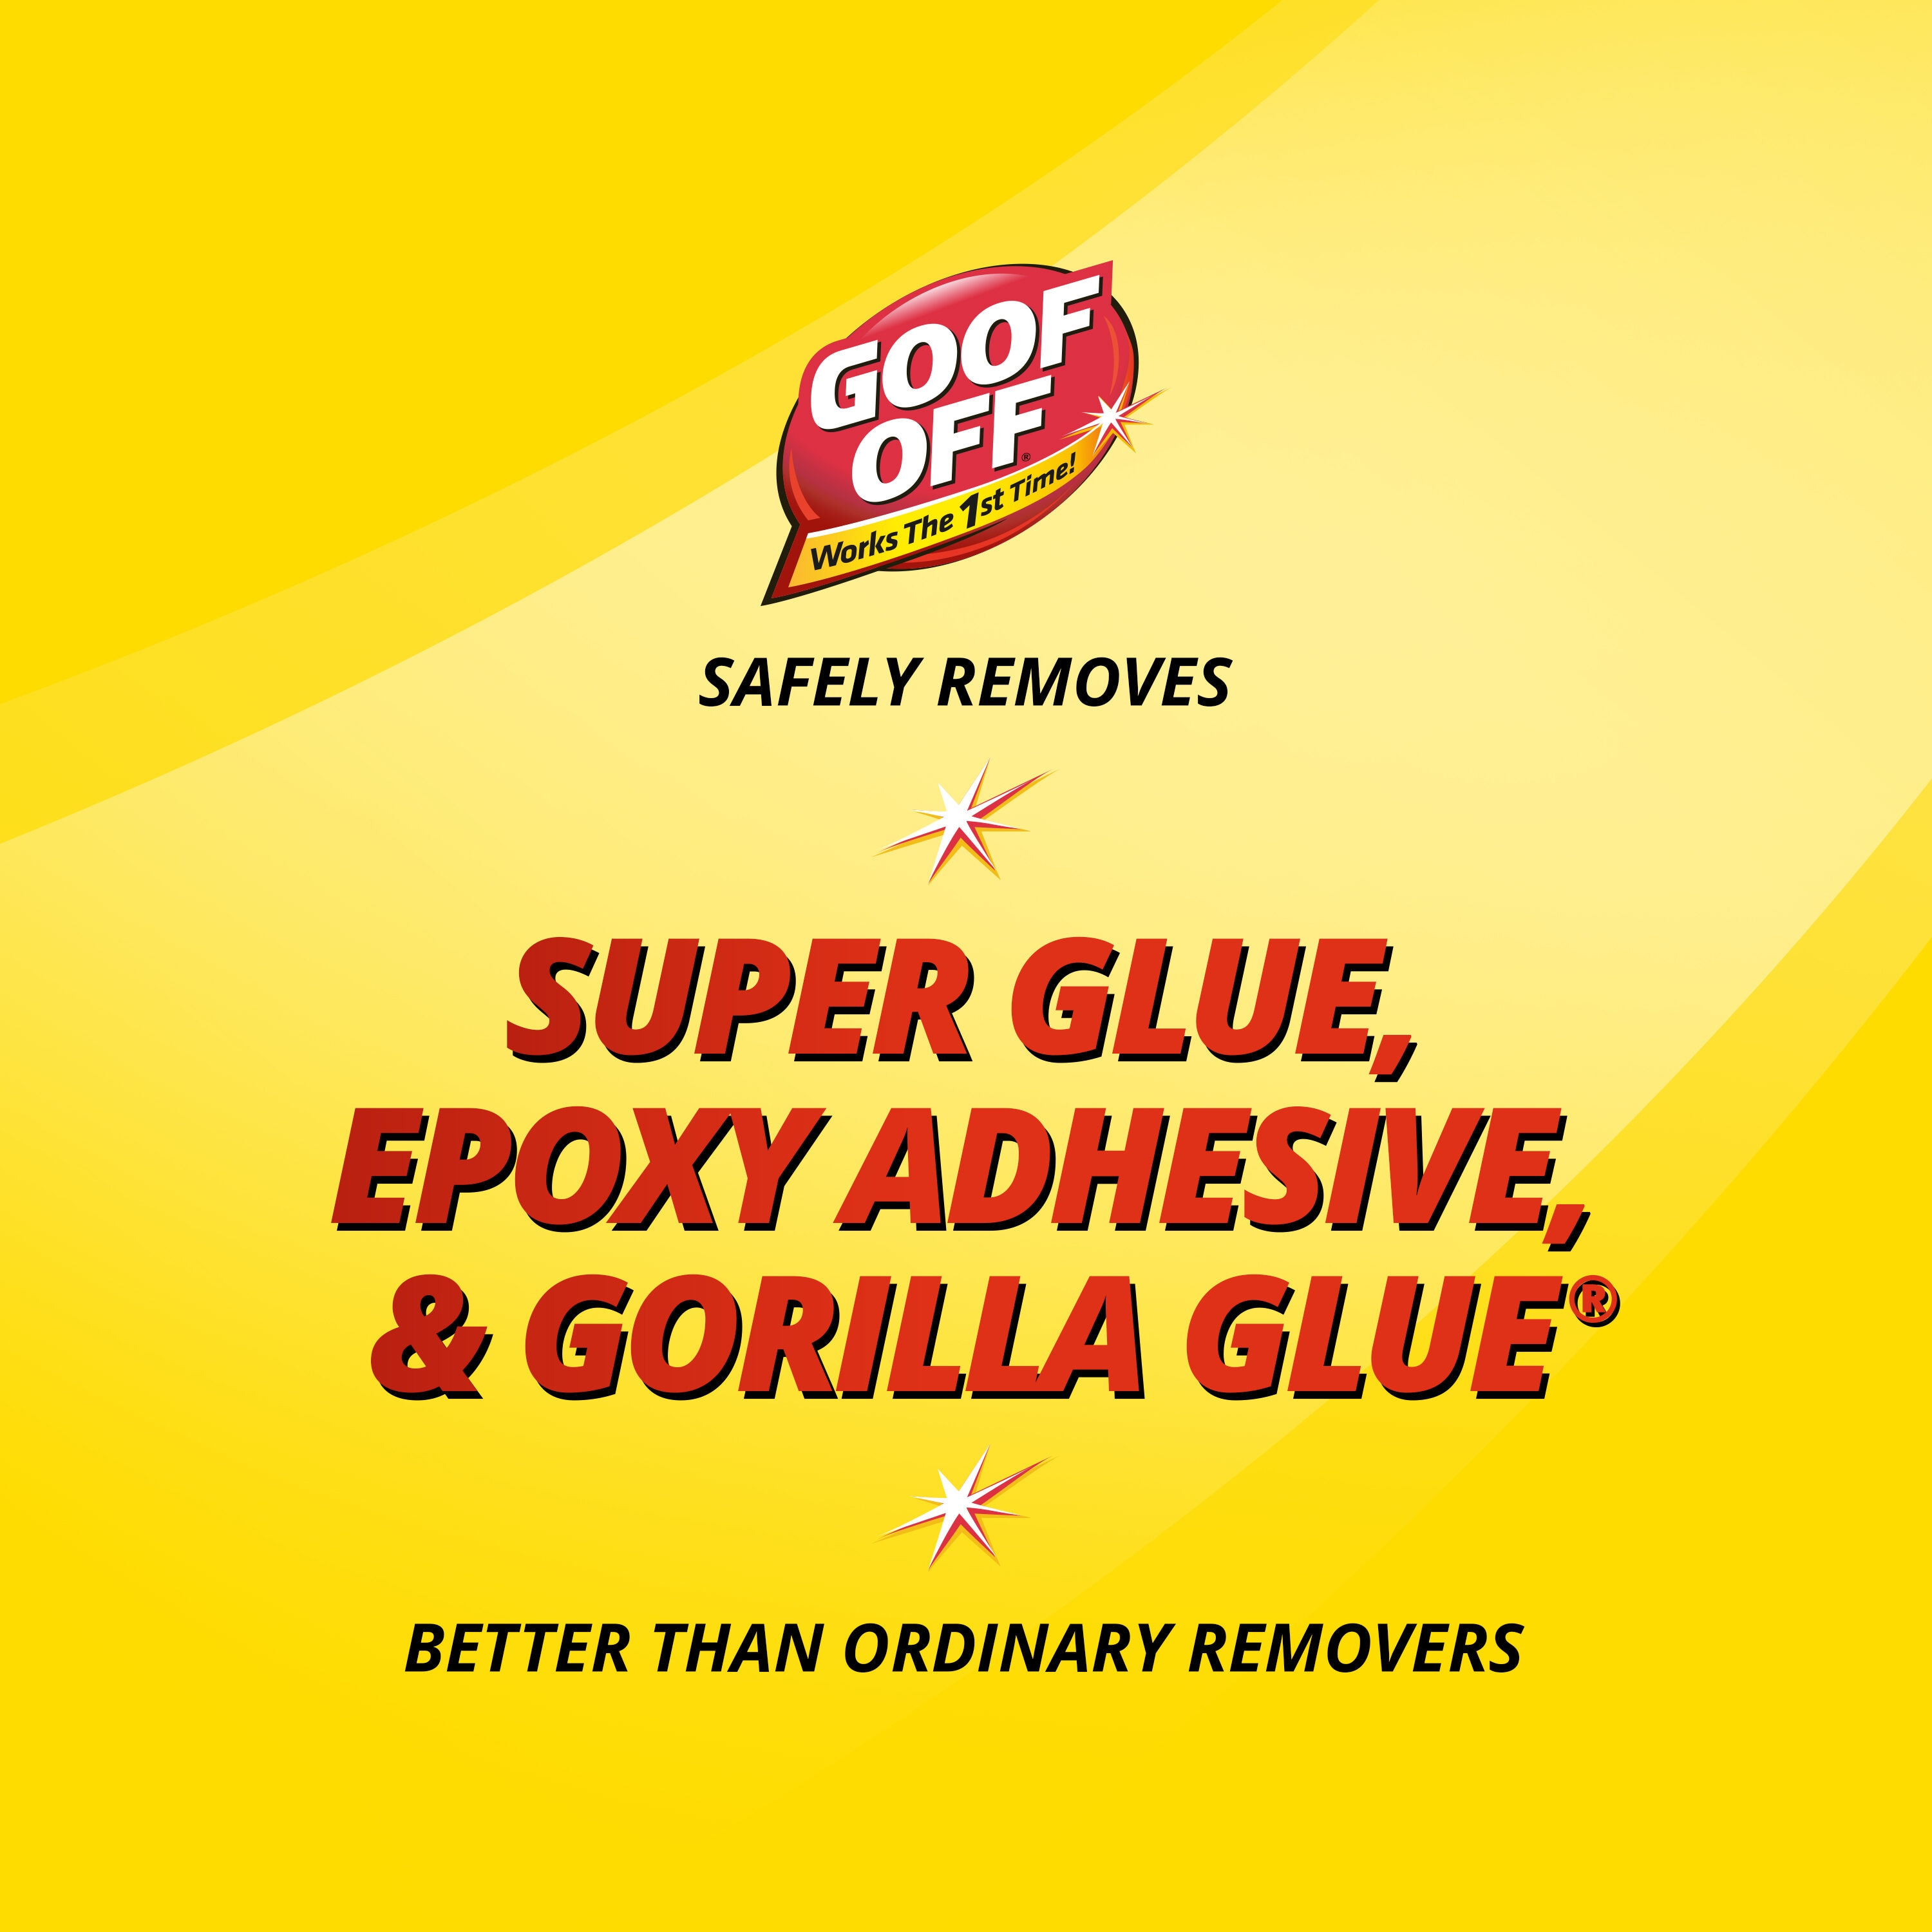 Henry Adhesive Remover Liquid - 1 Count Pour Bottle for Easy